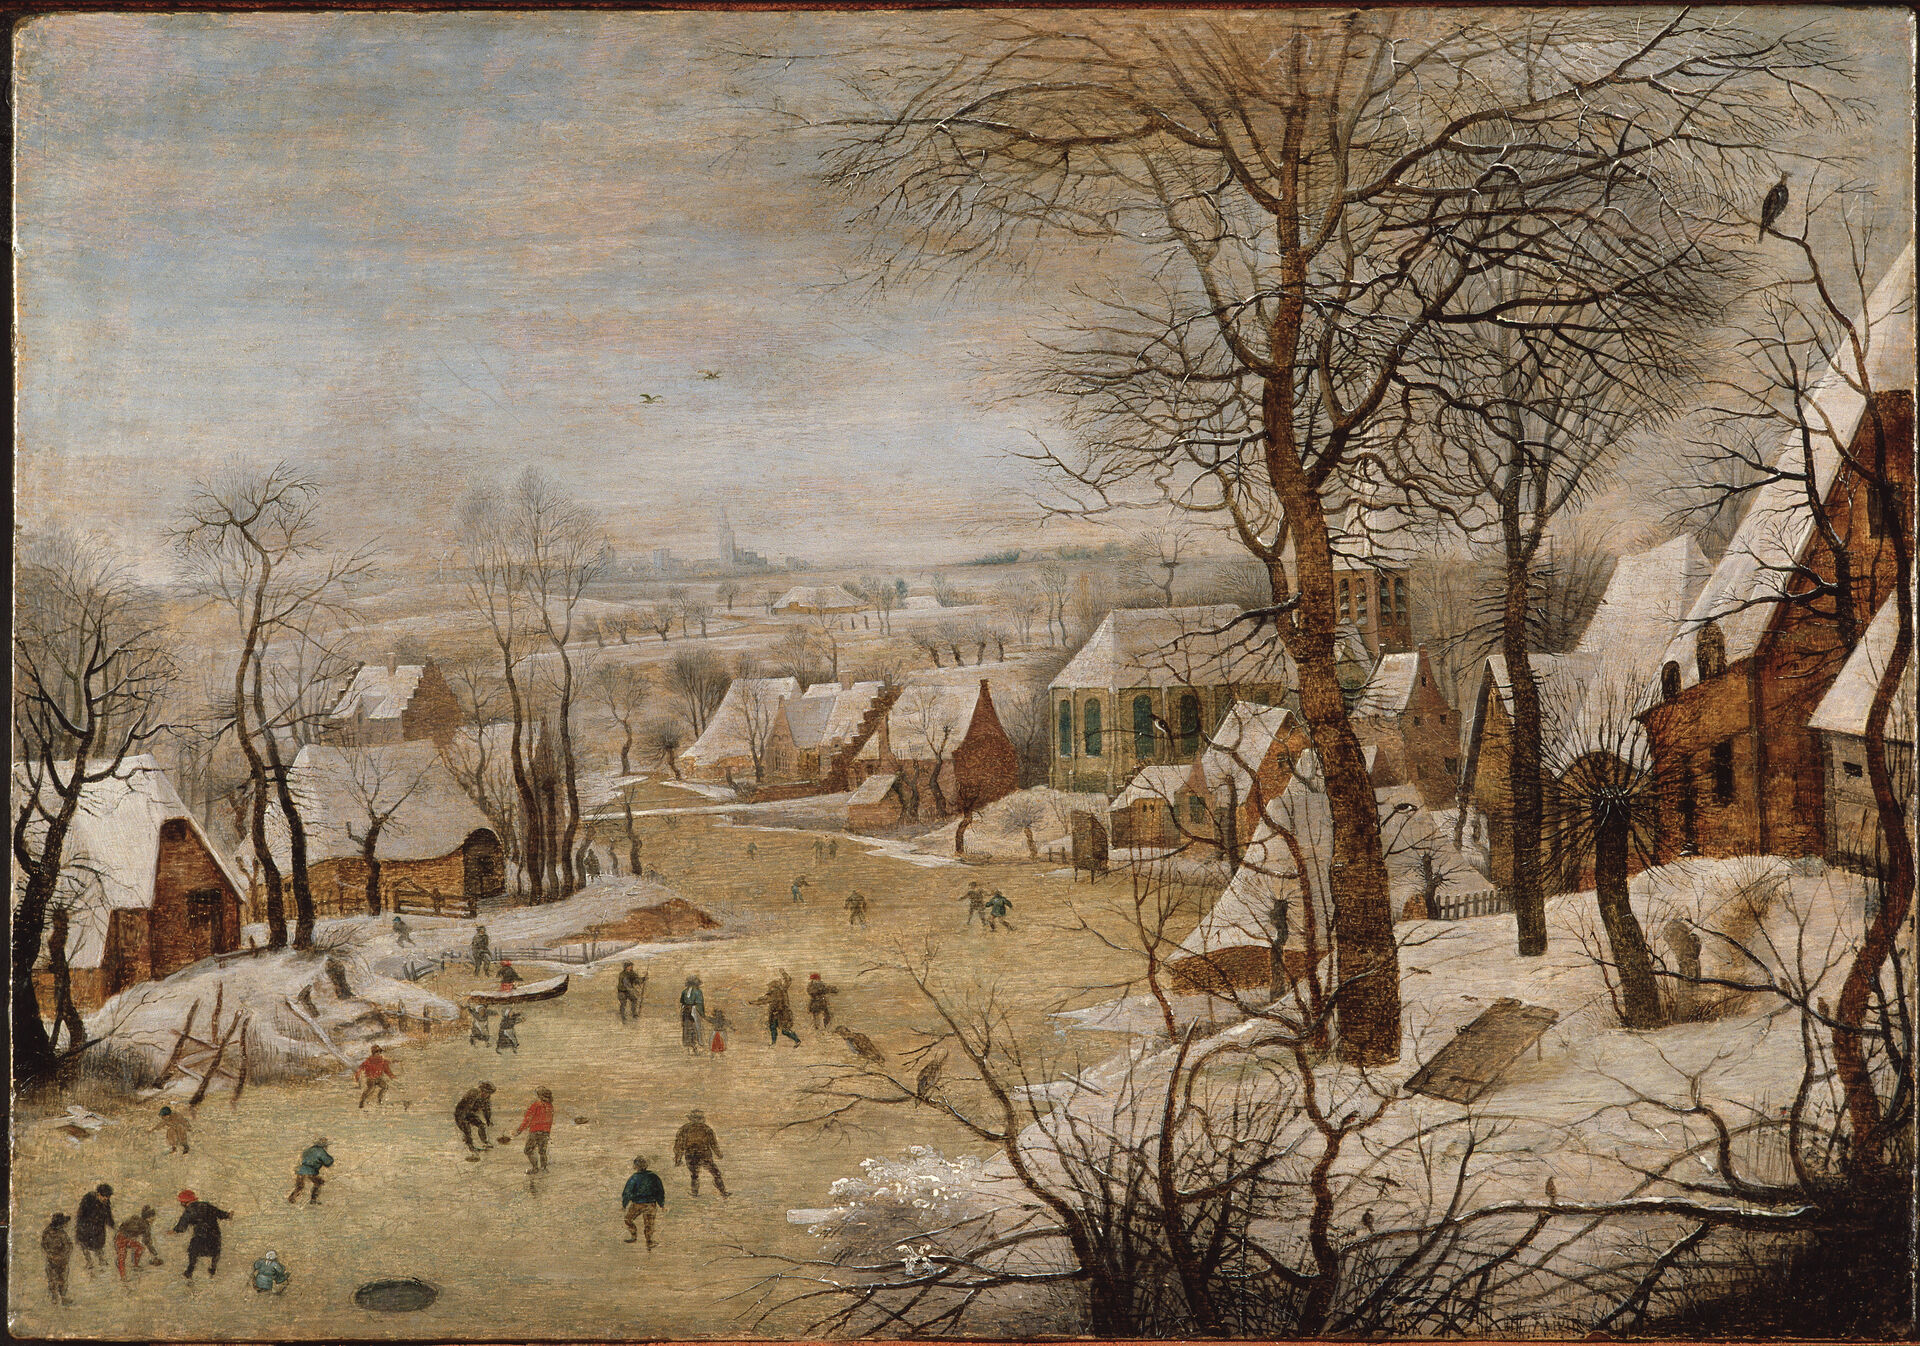 Pieter Bruegel the younger, Winter Landscape with Skaters and a Bird Trap. Oil on wood. Nationalmuseum.